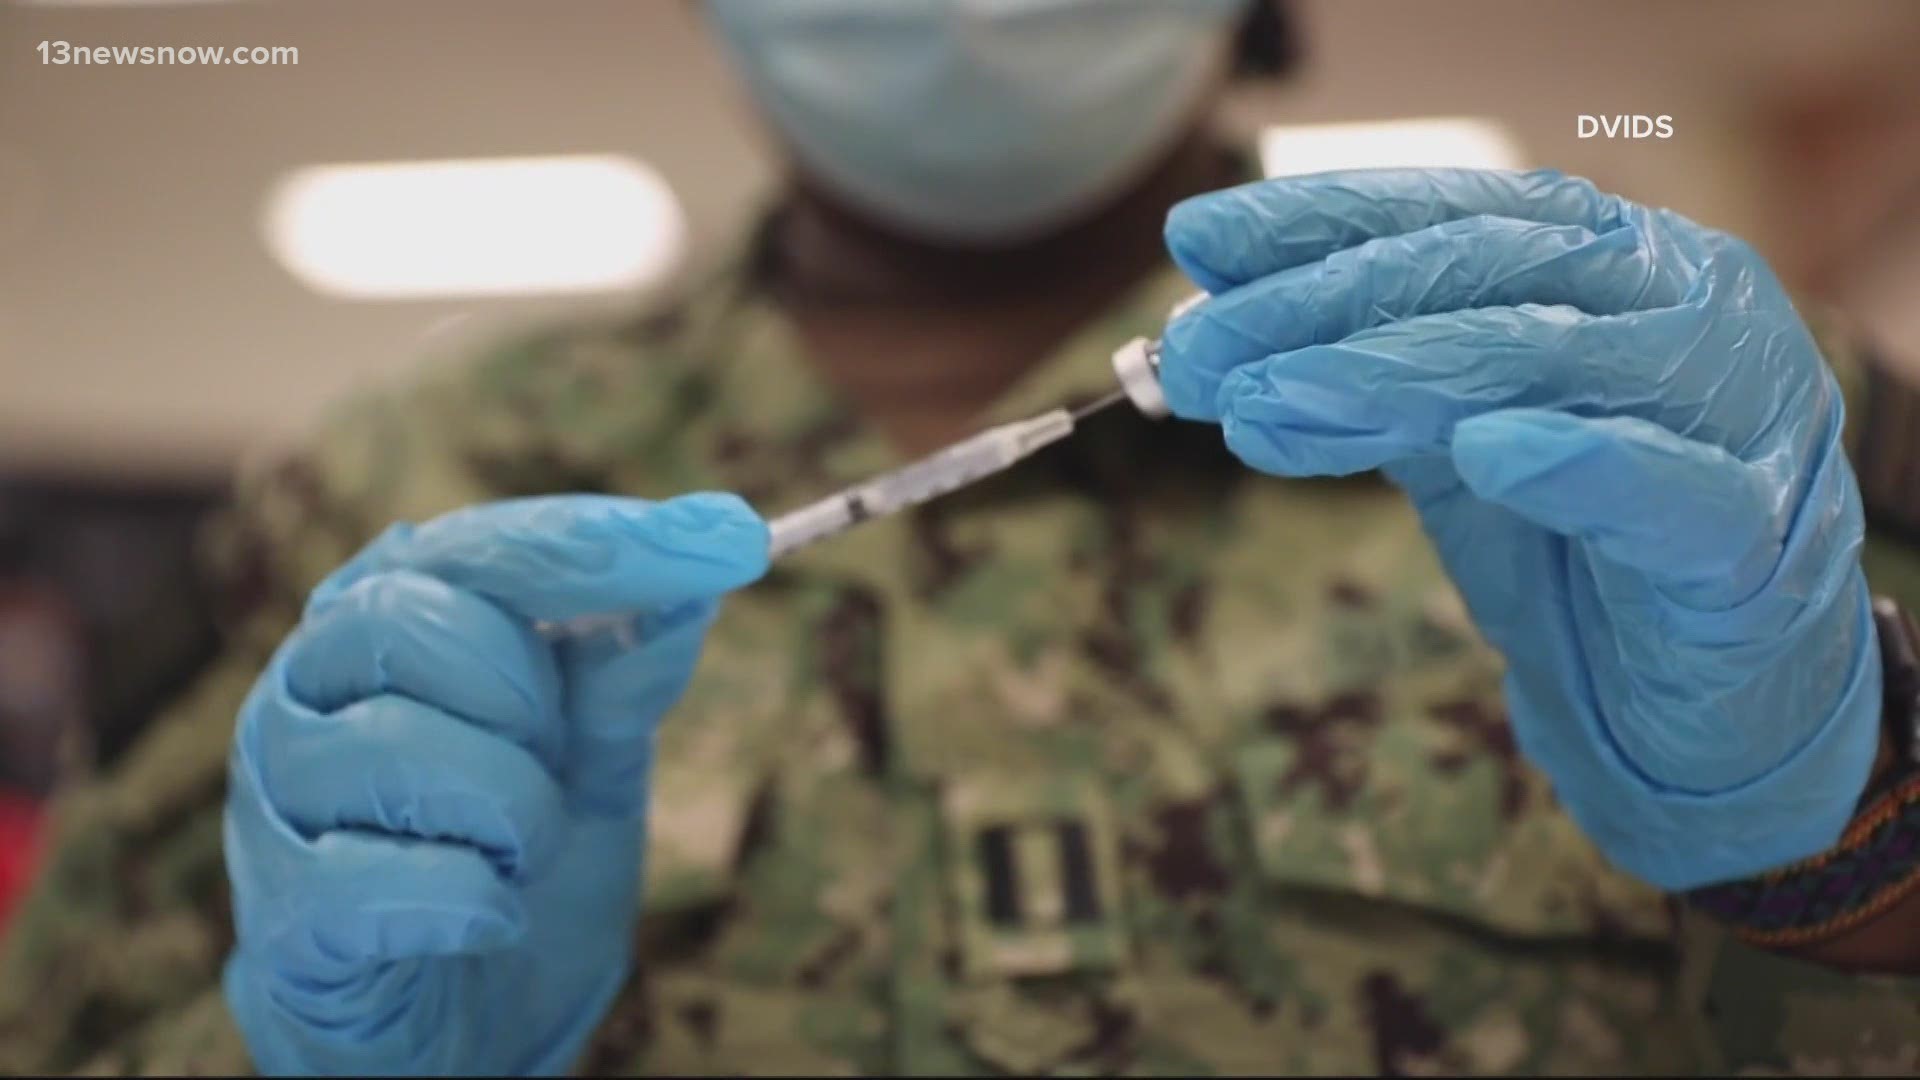 Veterans are going to battle against COVID-19. Many have volunteered at the FEMA vaccination site that opened up in Norfolk. 13News Now Mike Gooding has this story.